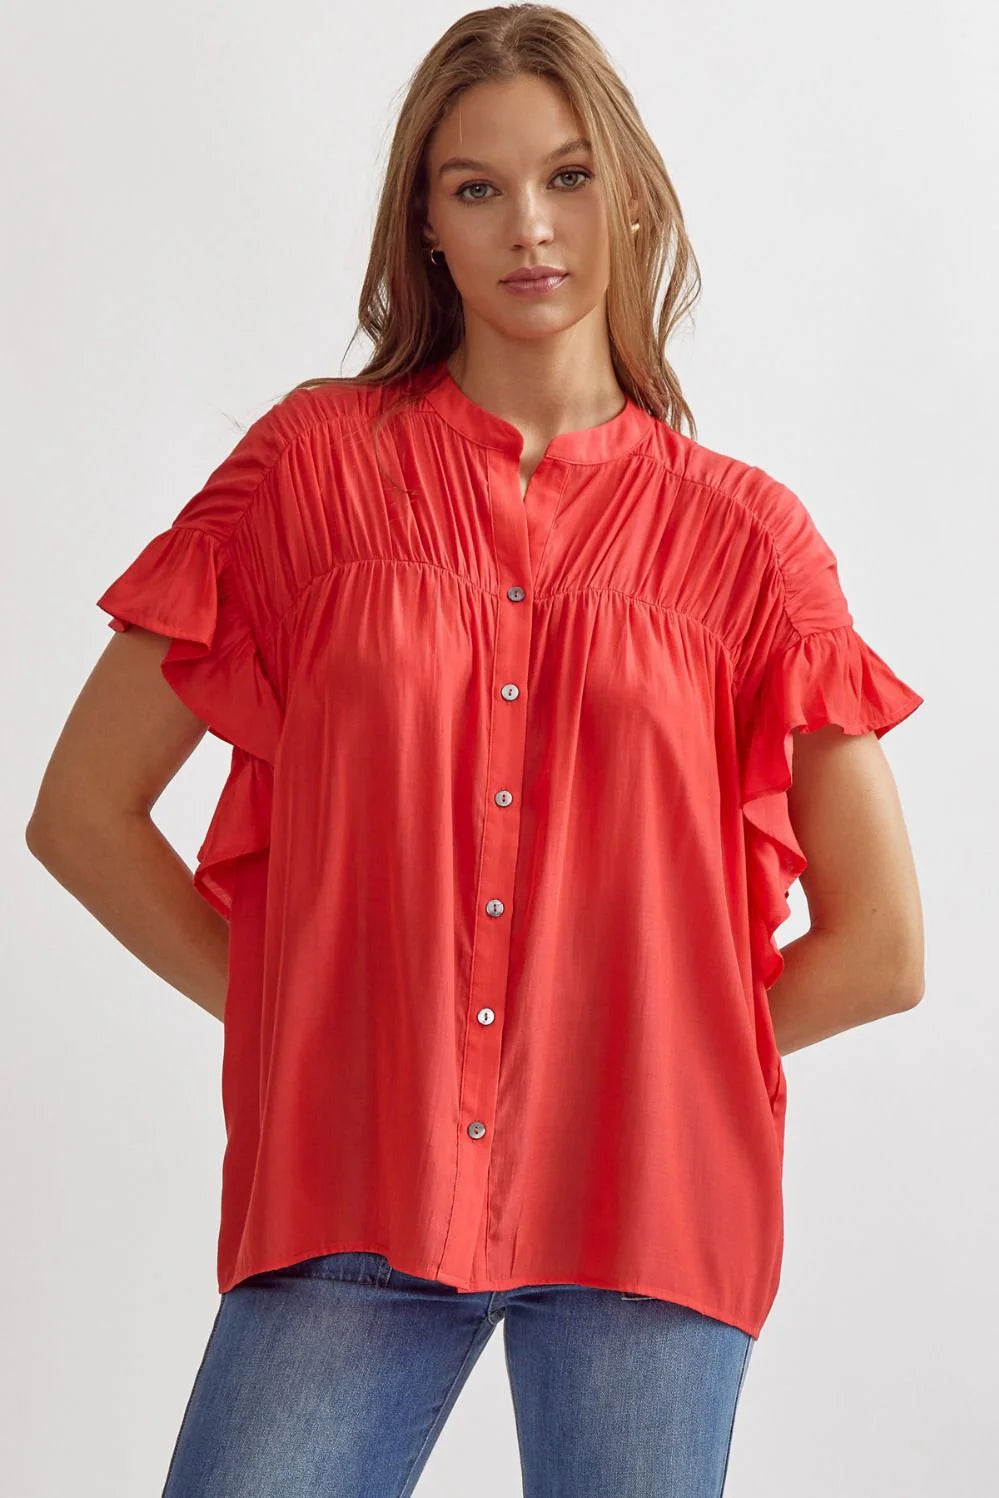 Punch Button Up Ruffle Sleeve Top